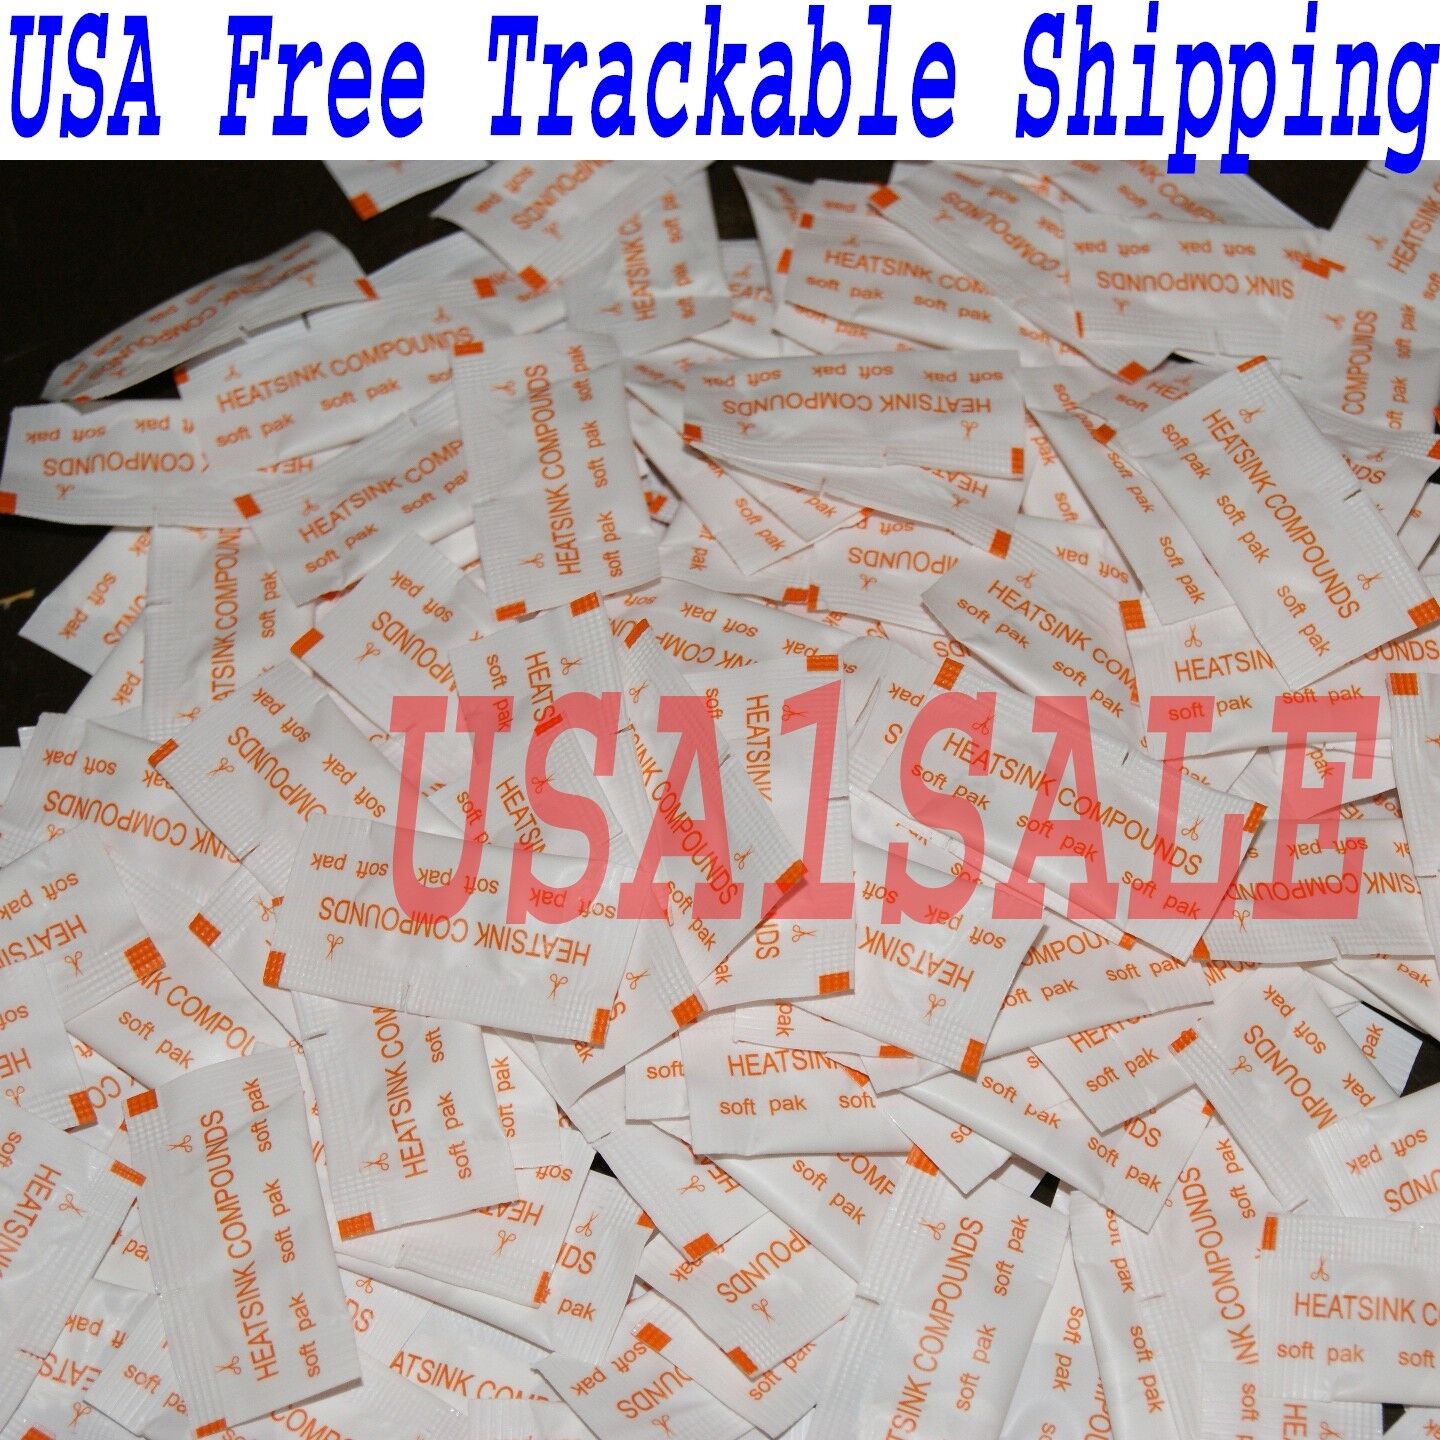 Wholesale Lot of 500 pcs White Heatsink Compounds Thermal Paste Grease G Value √